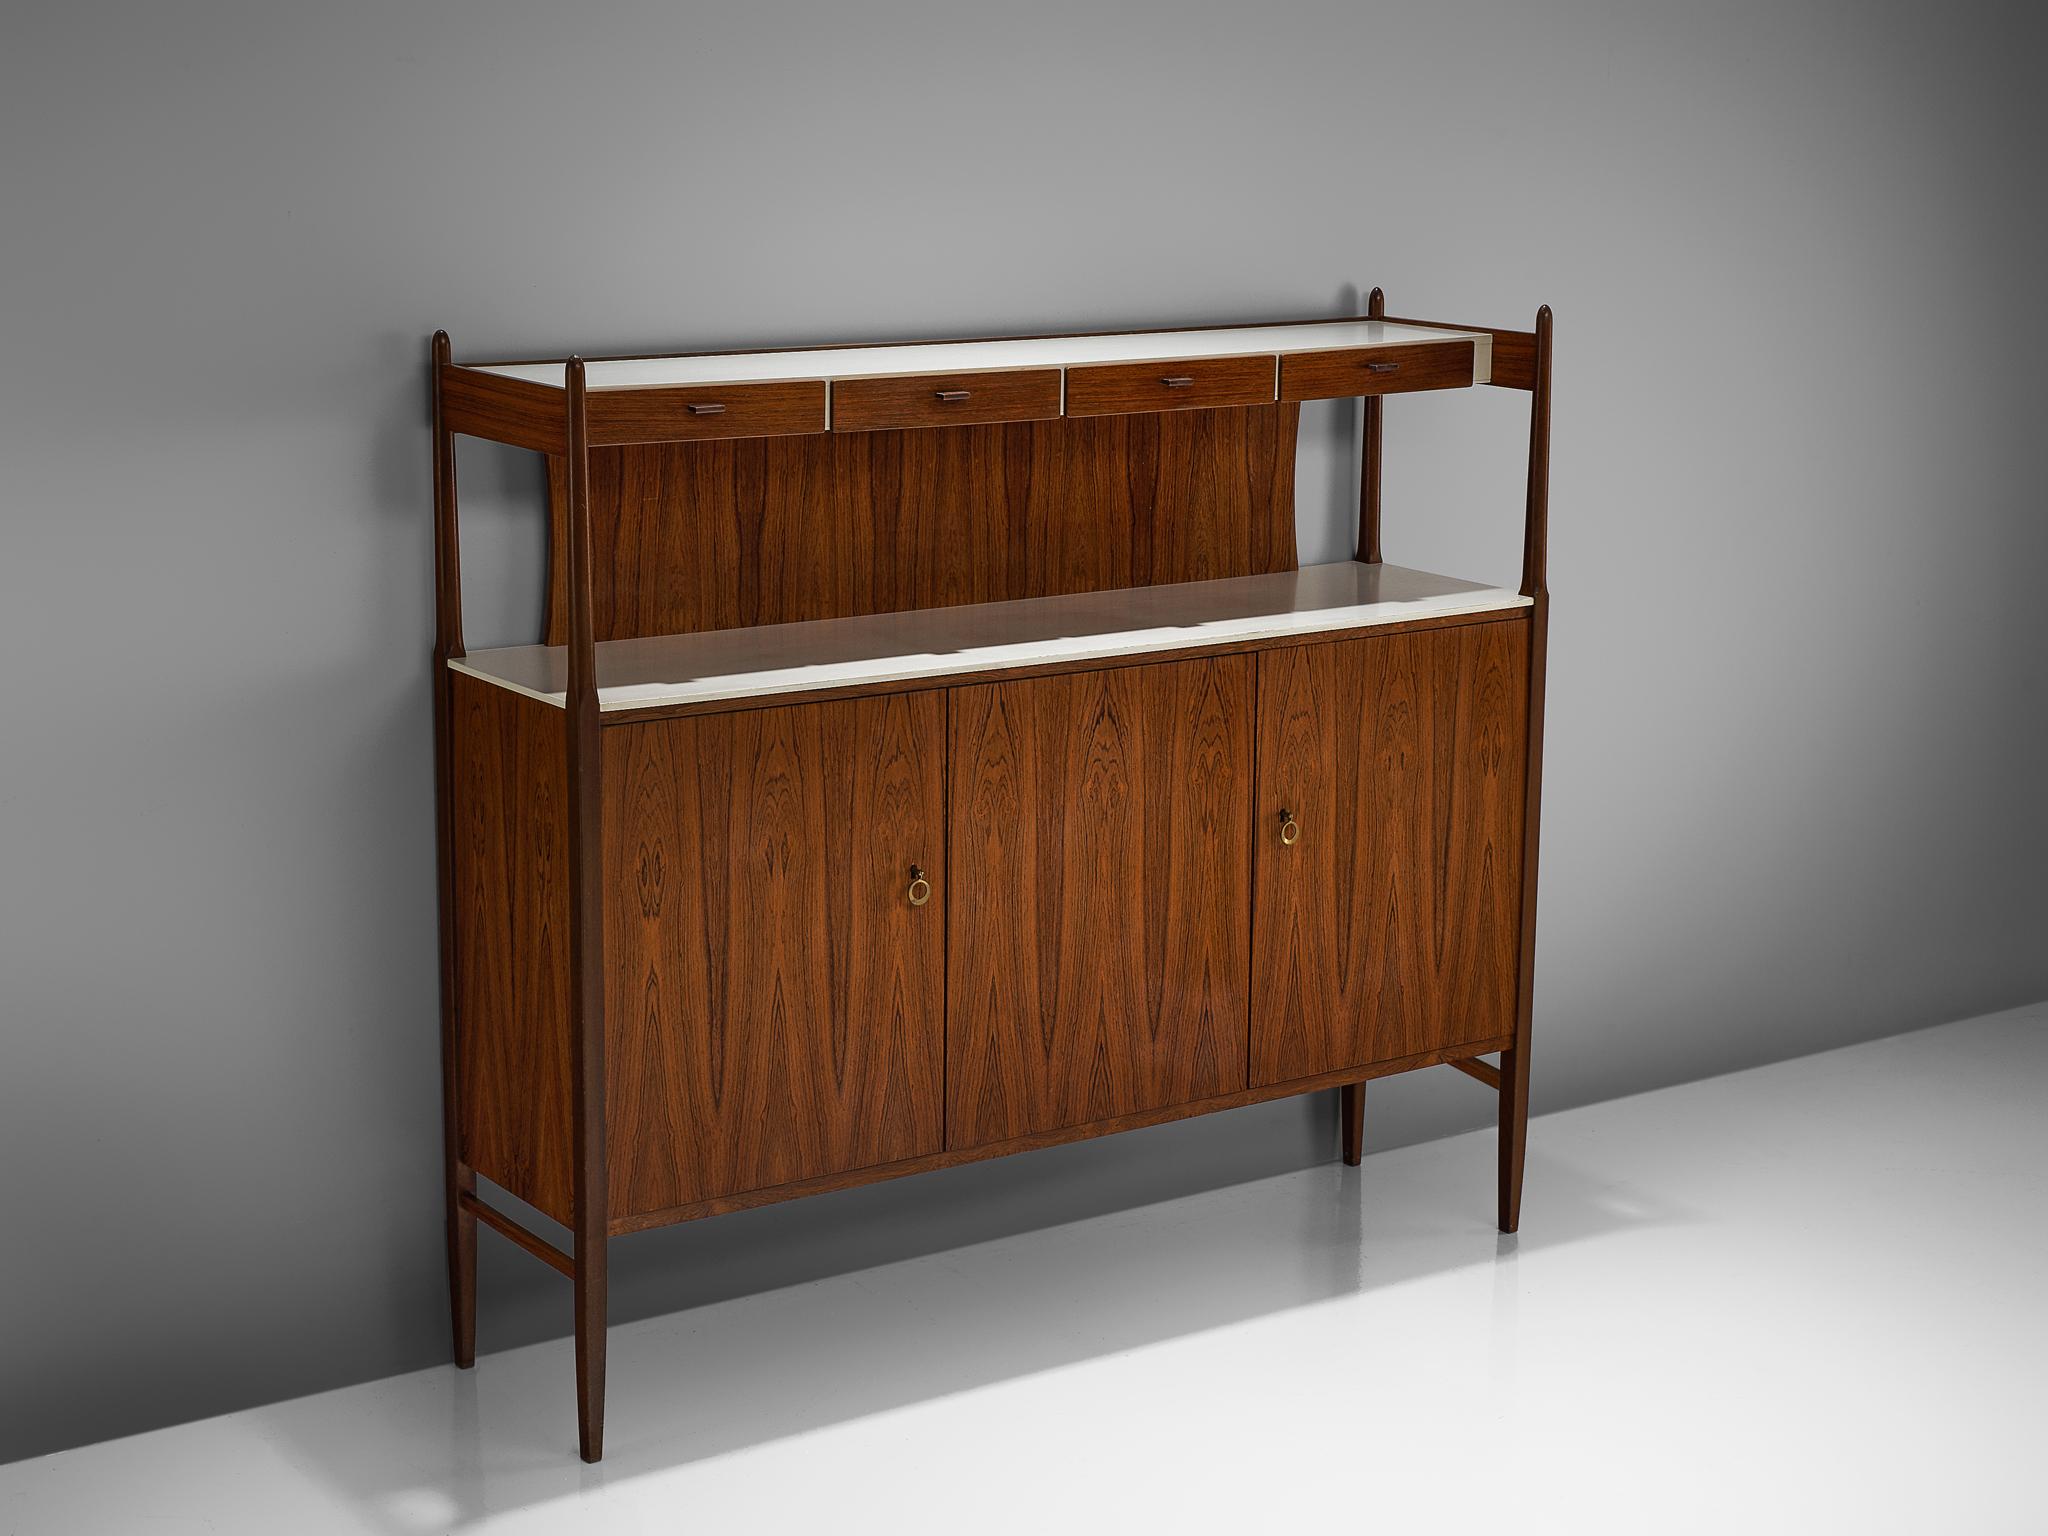 Highboard, rosewood, brass, Denmark, circa 1950.

This highboard features three segments. Firstly the three-door cabinet at the bottom. The doors are structure of the rosewood grains and two brass handles. Above the white top of the cabinet rests